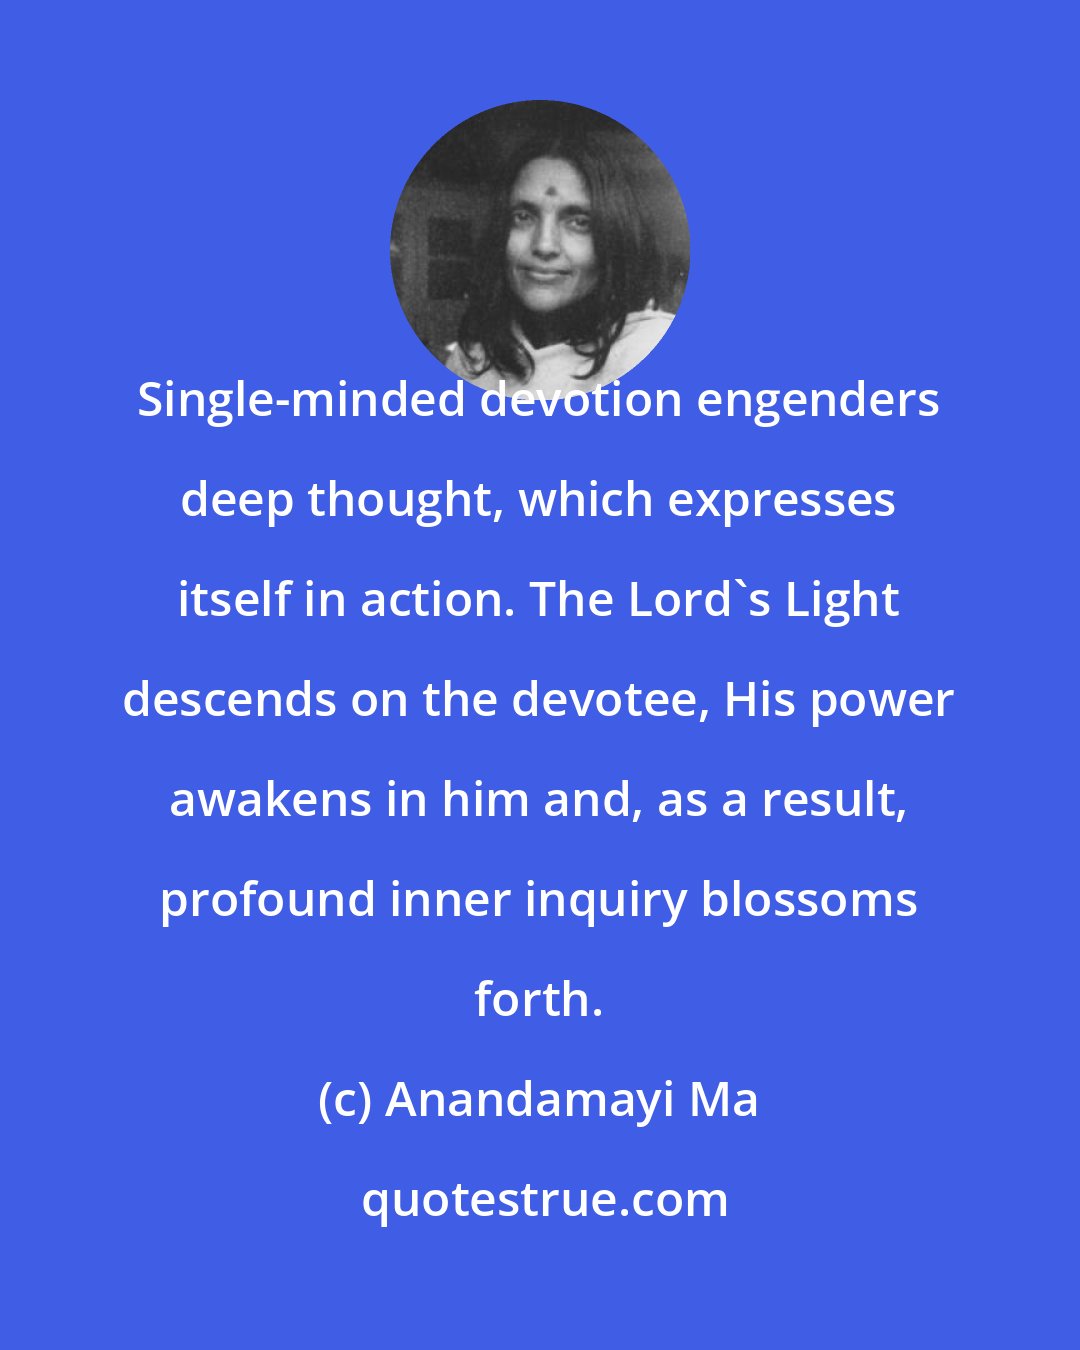 Anandamayi Ma: Single-minded devotion engenders deep thought, which expresses itself in action. The Lord's Light descends on the devotee, His power awakens in him and, as a result, profound inner inquiry blossoms forth.